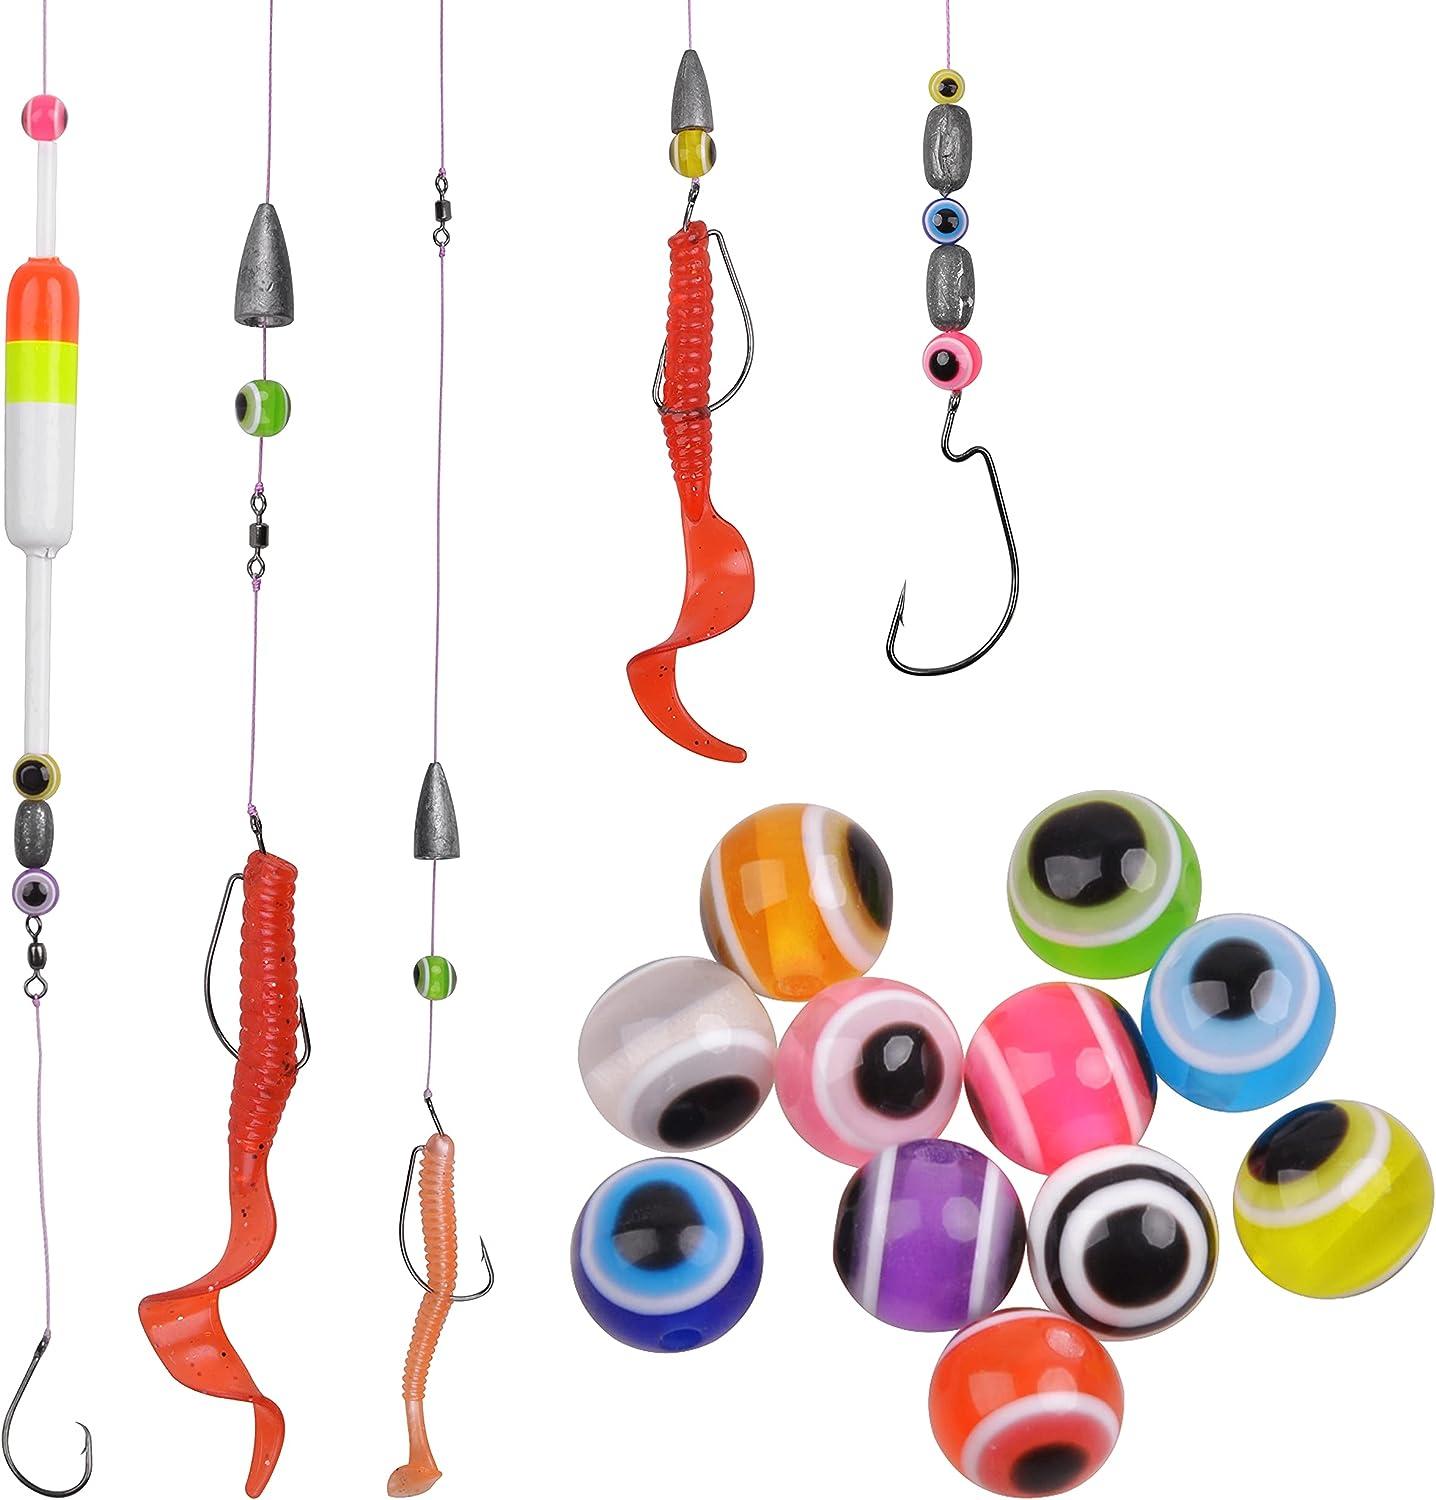 Uxcell 4mm Round Plastic Fishing Beads Tackle Tool Multicolor 1000 Pieces